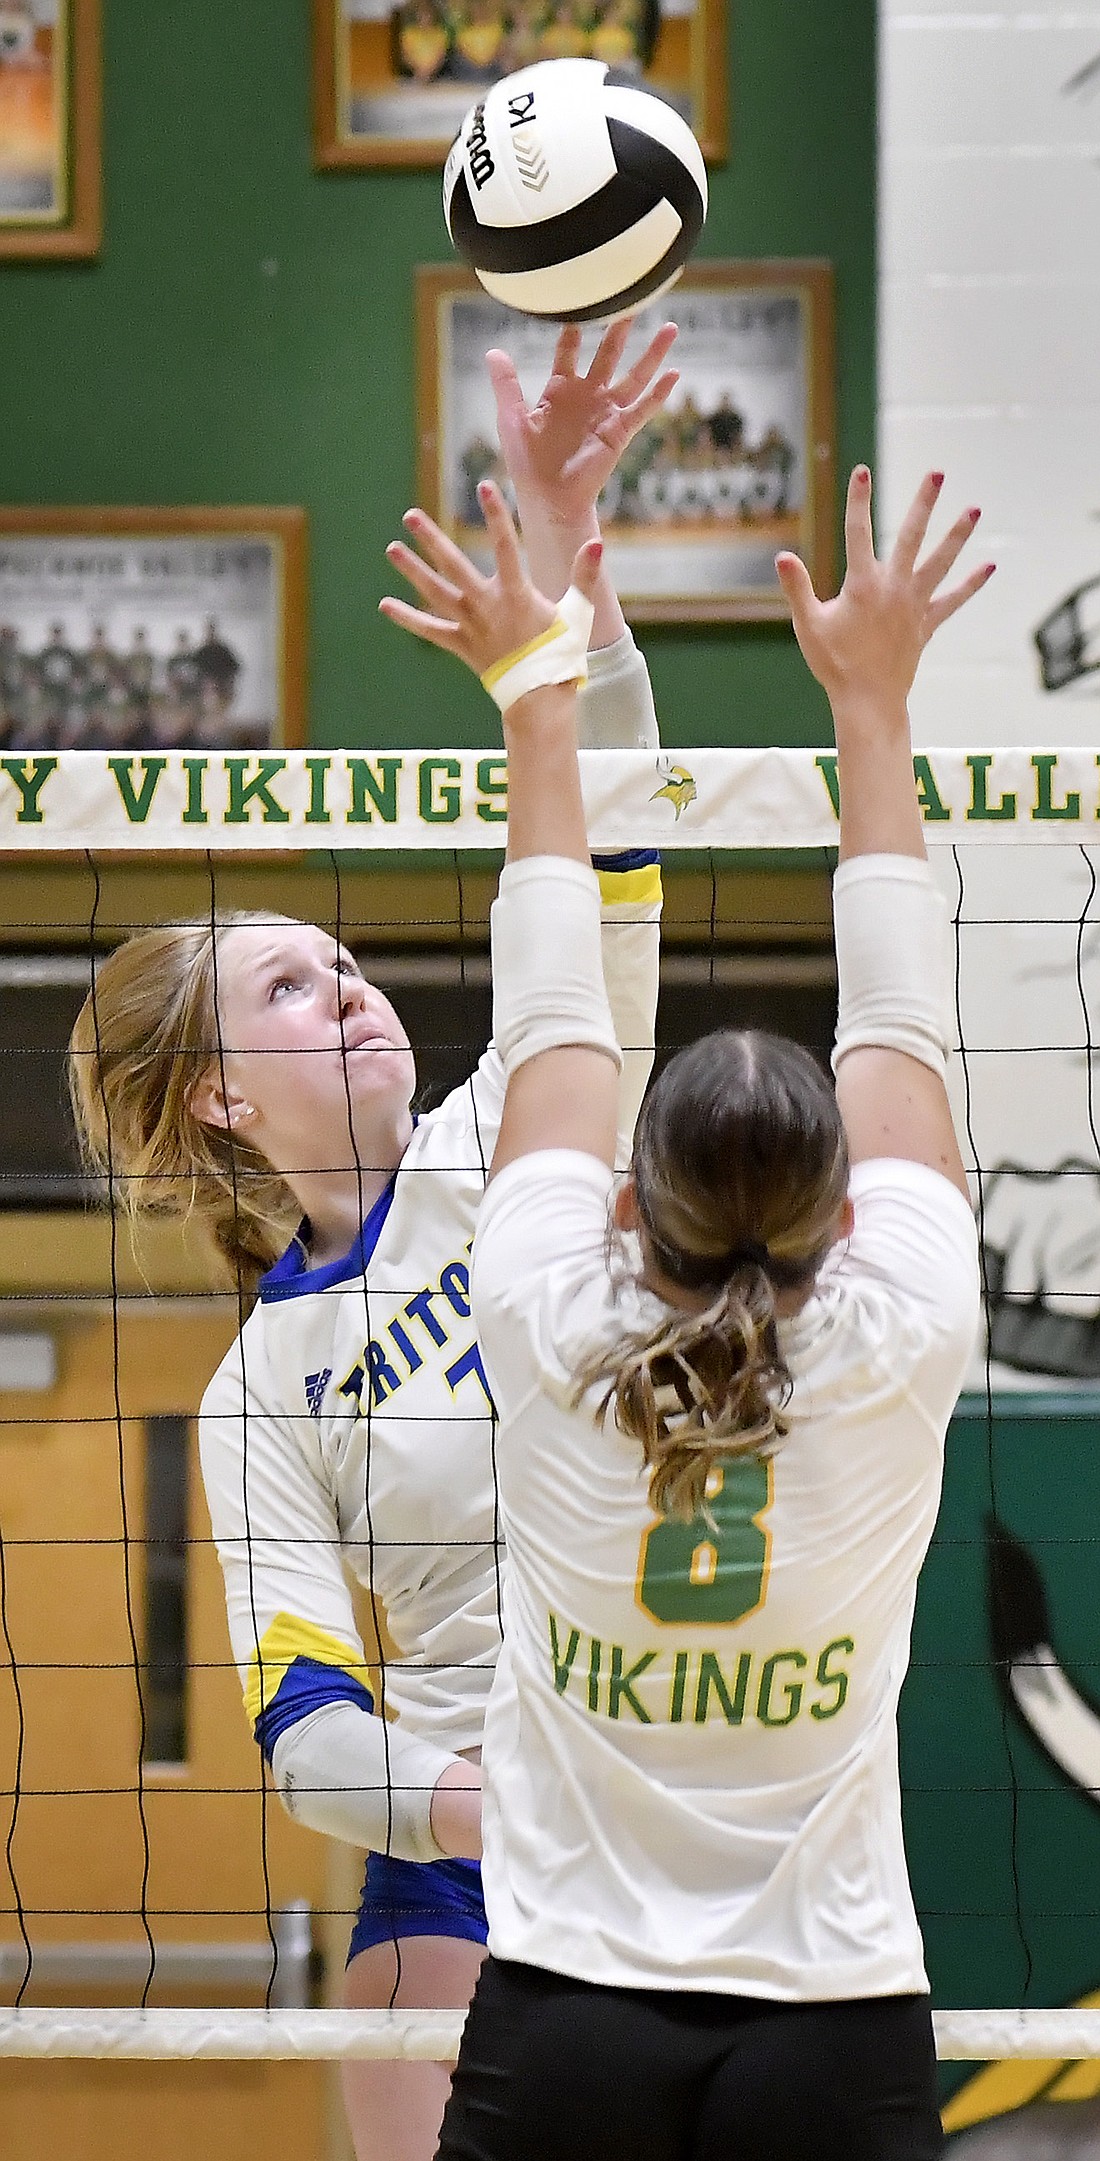 Junior Mya Davis of Triton goes up for a kill as Valley's Ava Egolf defends during the second set of Thursday night's match at Tippecanoe Valley. Photo by Gary Nieter